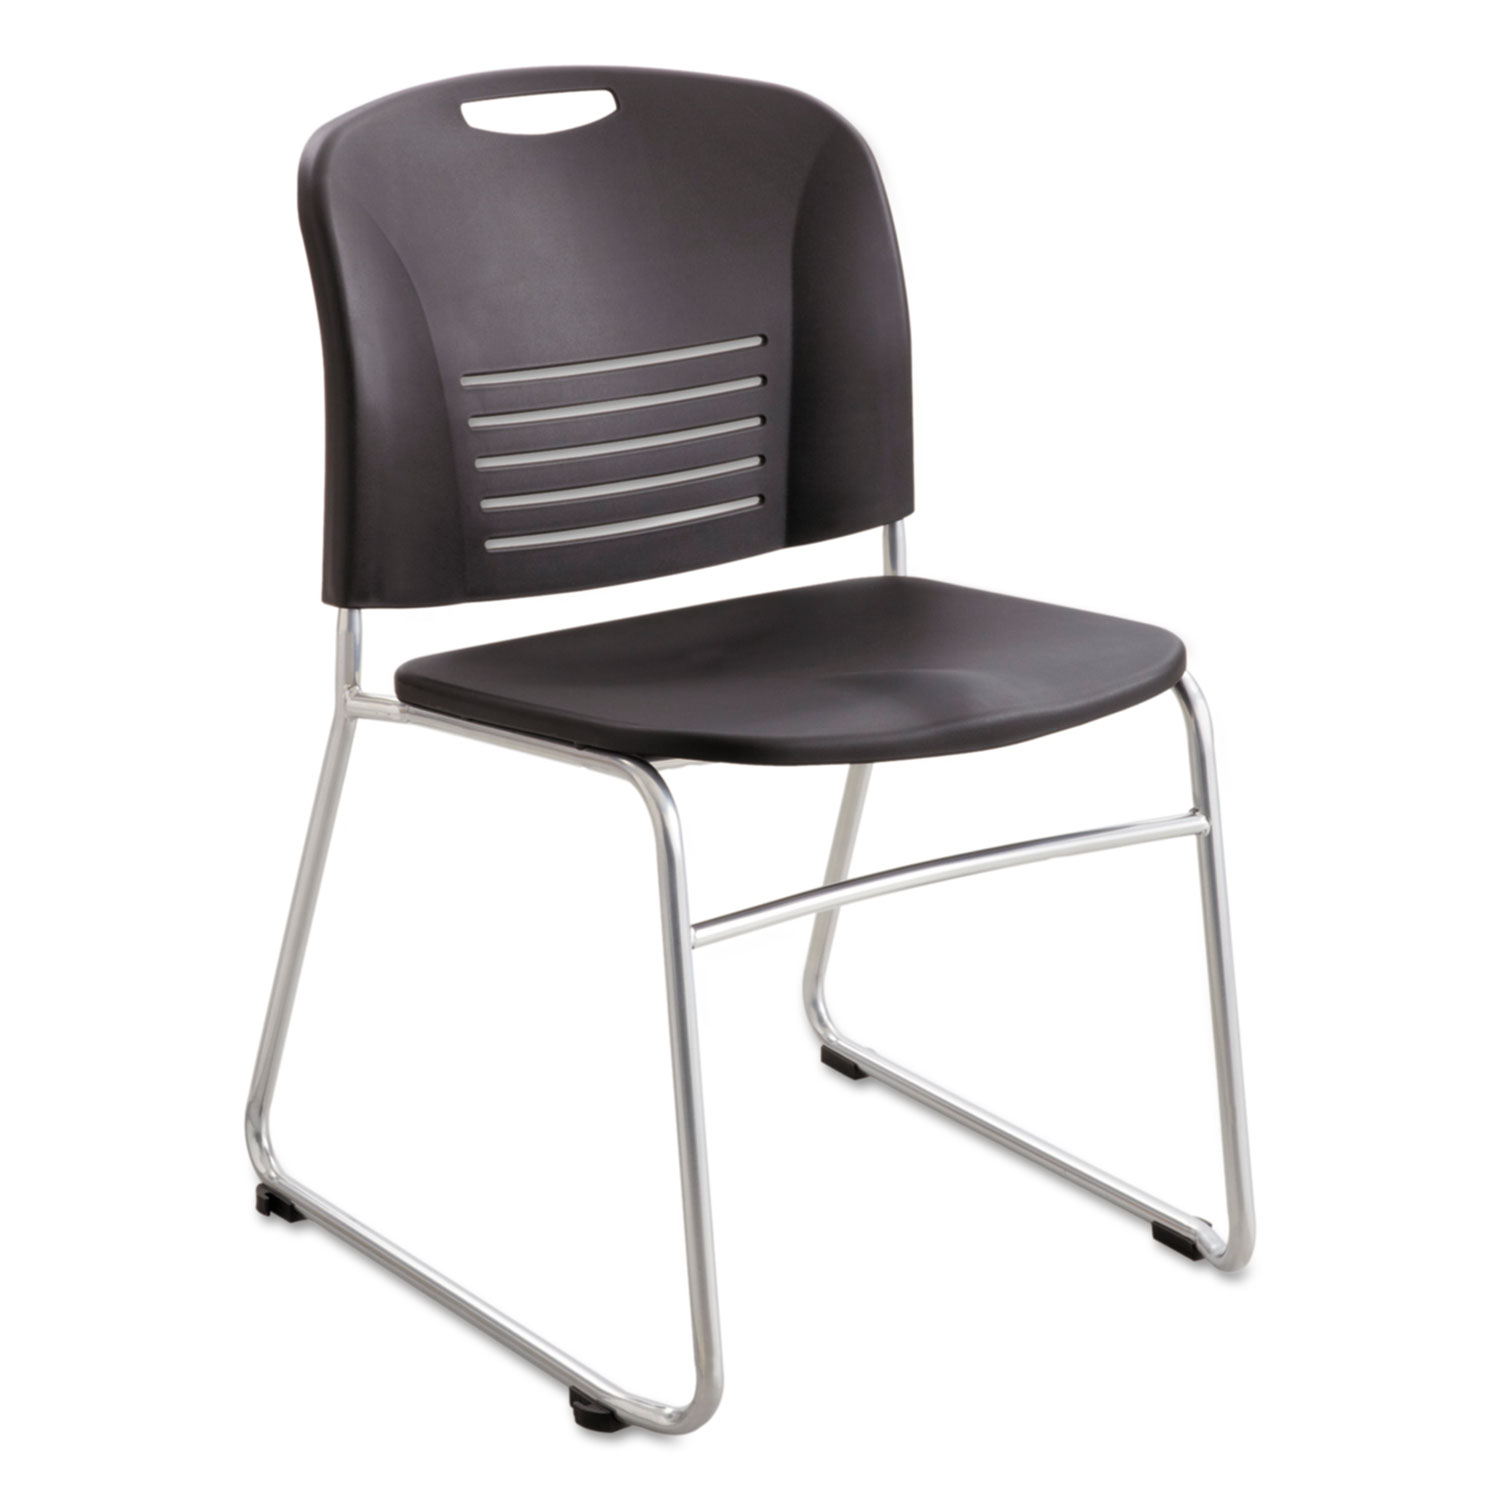  Safco 4292BL Vy Series Stack Chairs, Black Seat/Black Back, Silver Base, 2/Carton (SAF4292BL) 